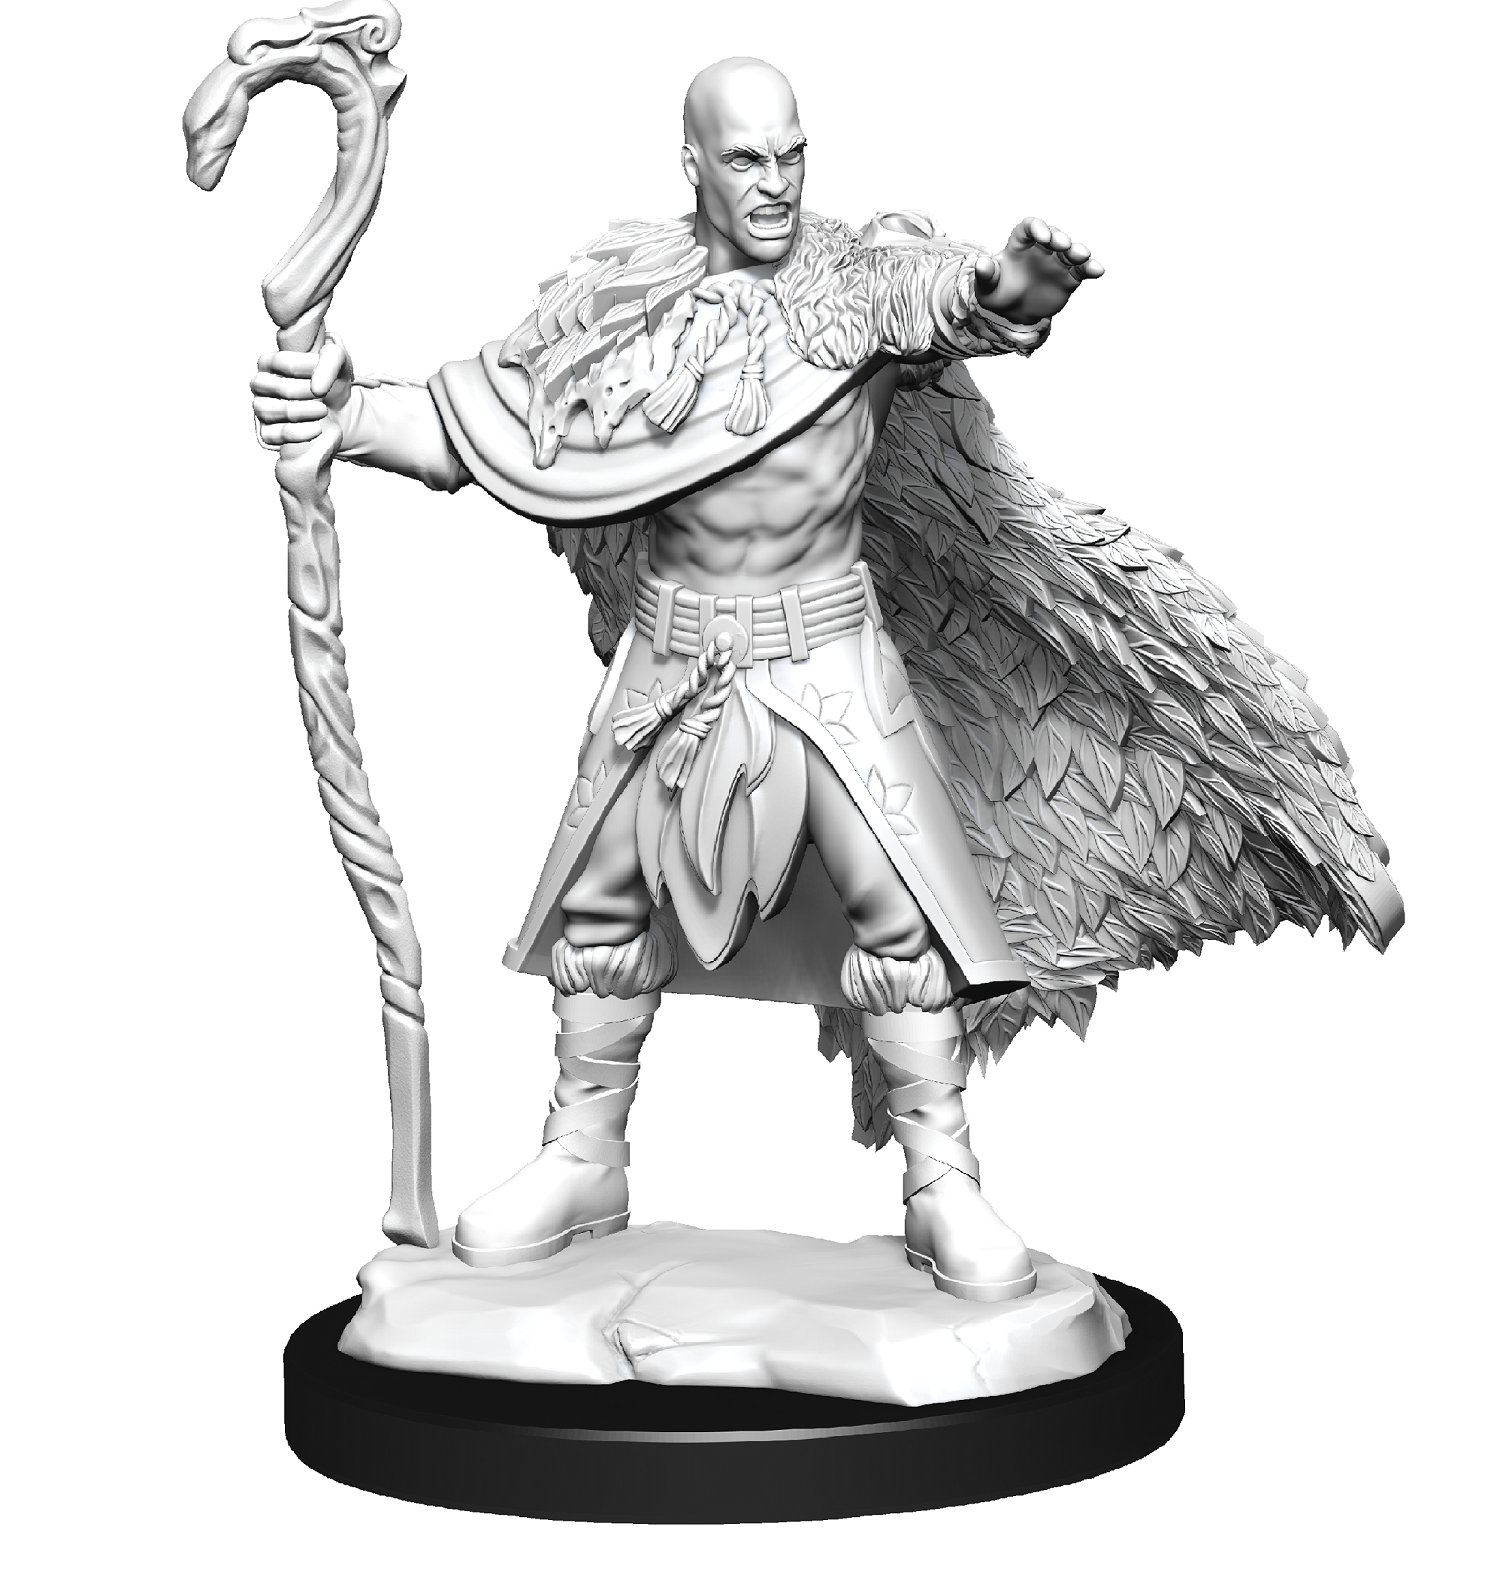 DND Unpainted Minis Wv14 Human Druid Male - Roleplaying Games - The Hooded Goblin